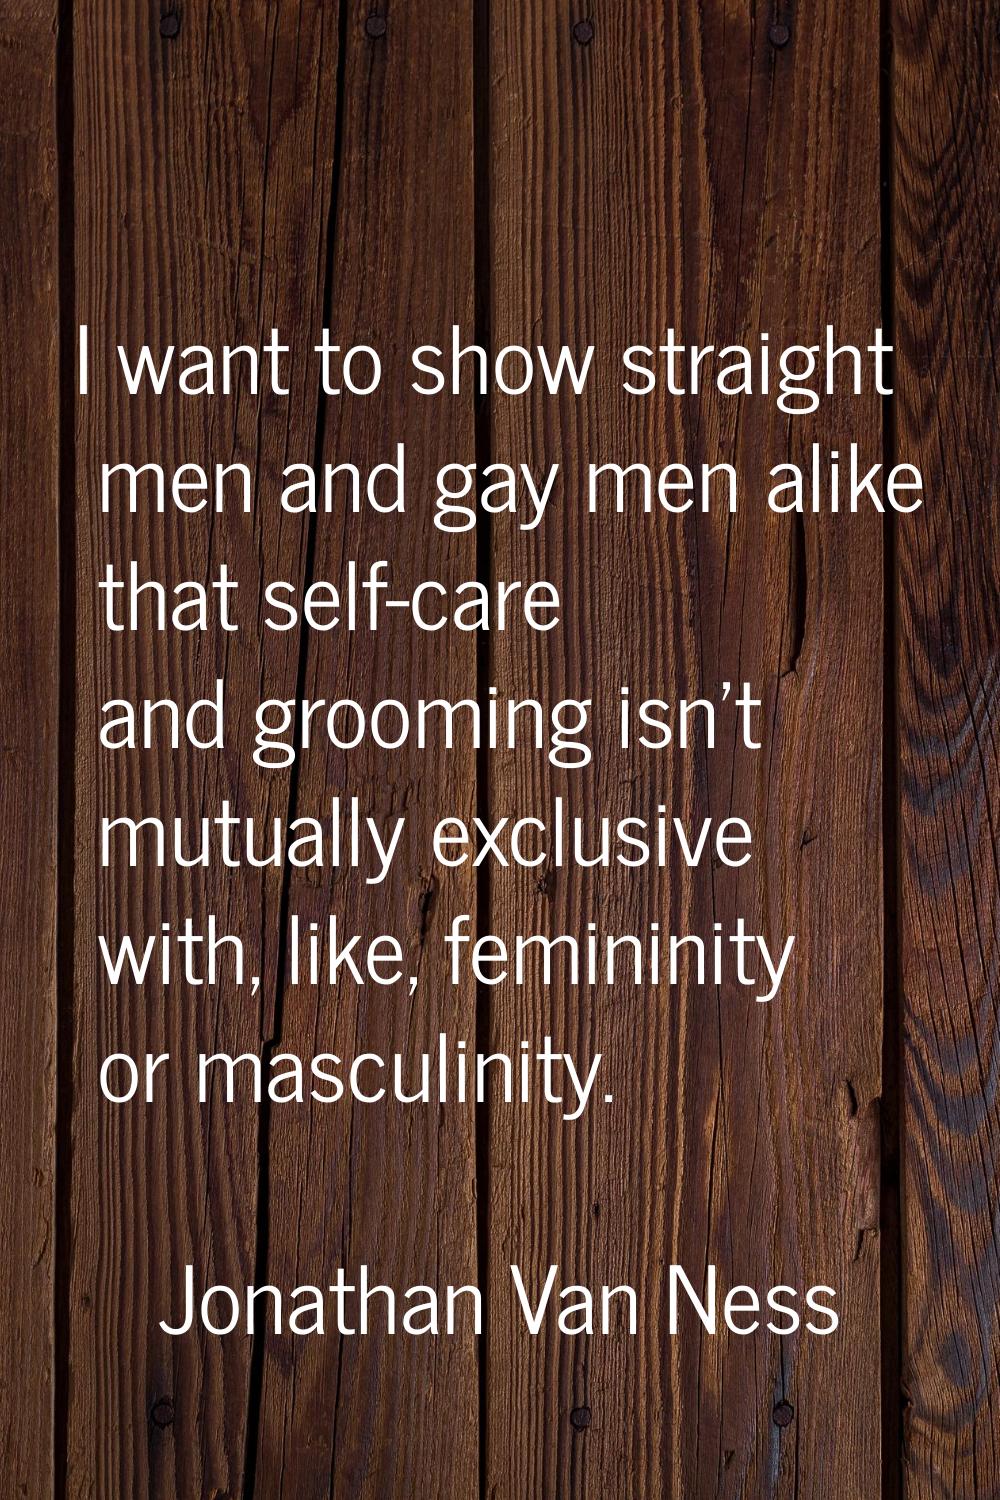 I want to show straight men and gay men alike that self-care and grooming isn't mutually exclusive 